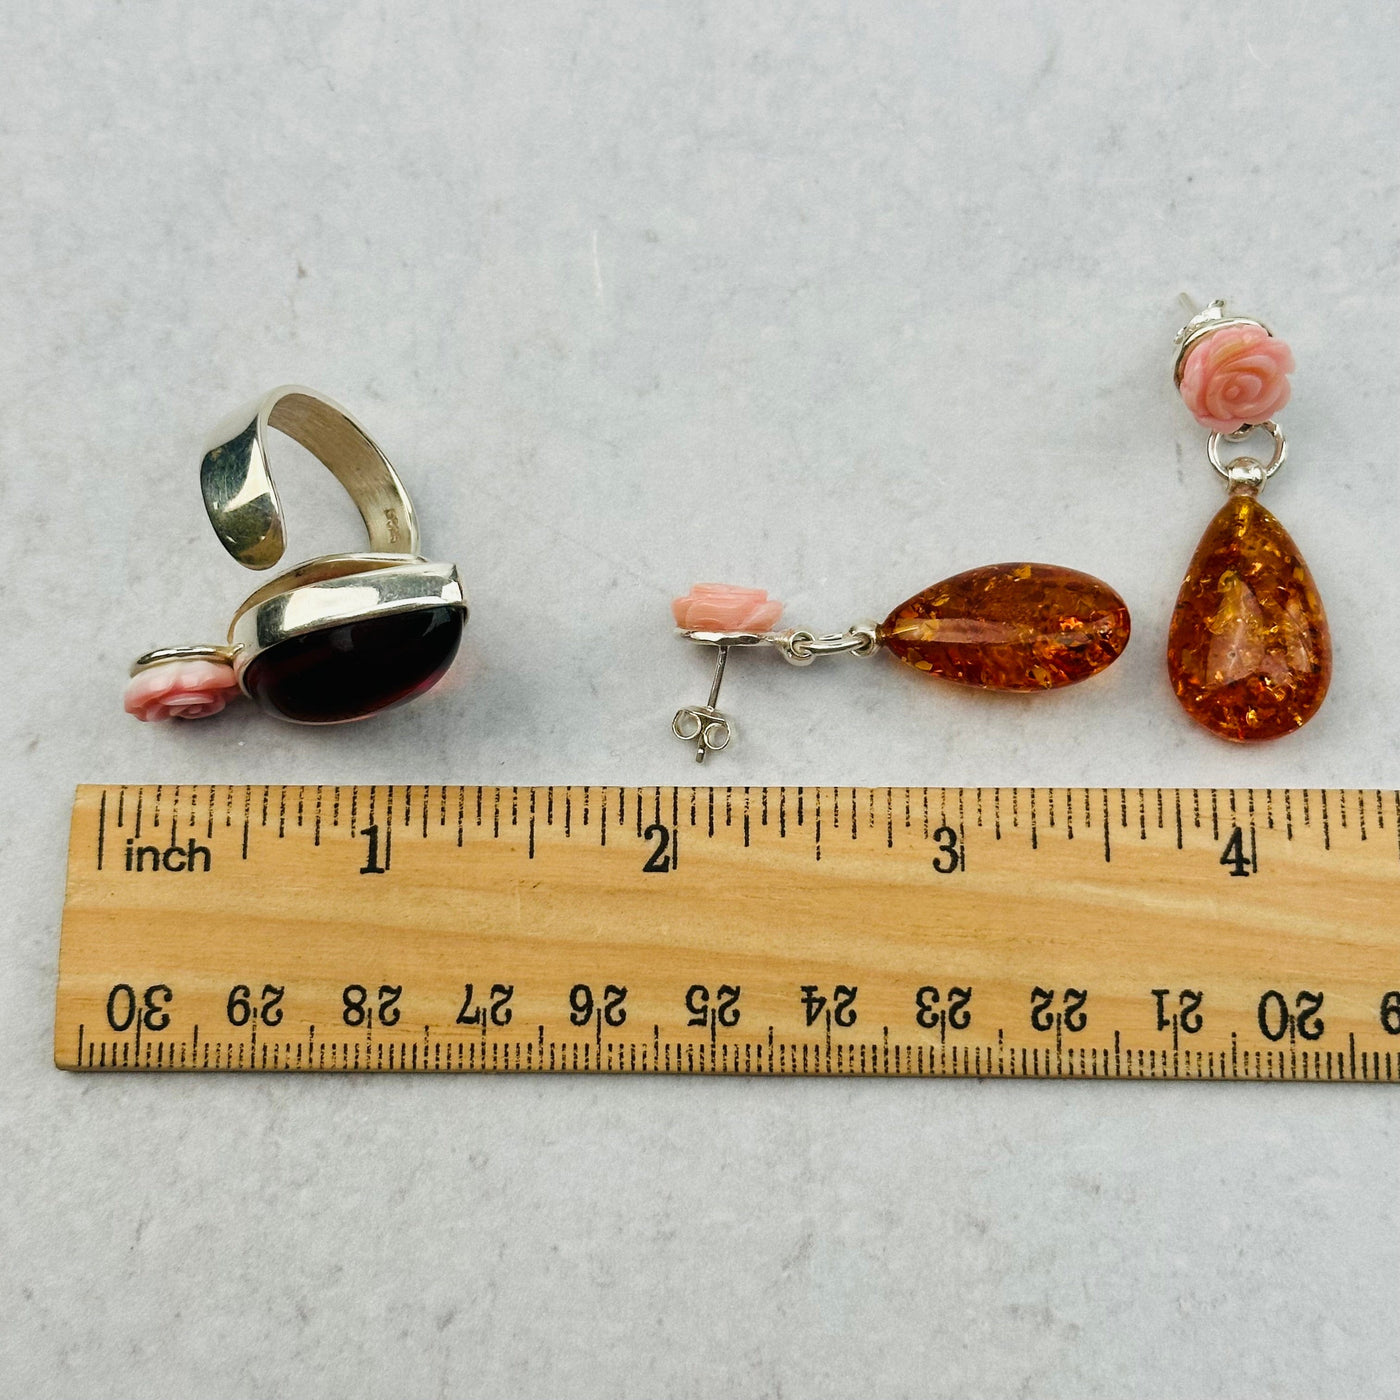 amber jewelry next to a ruler for size reference 